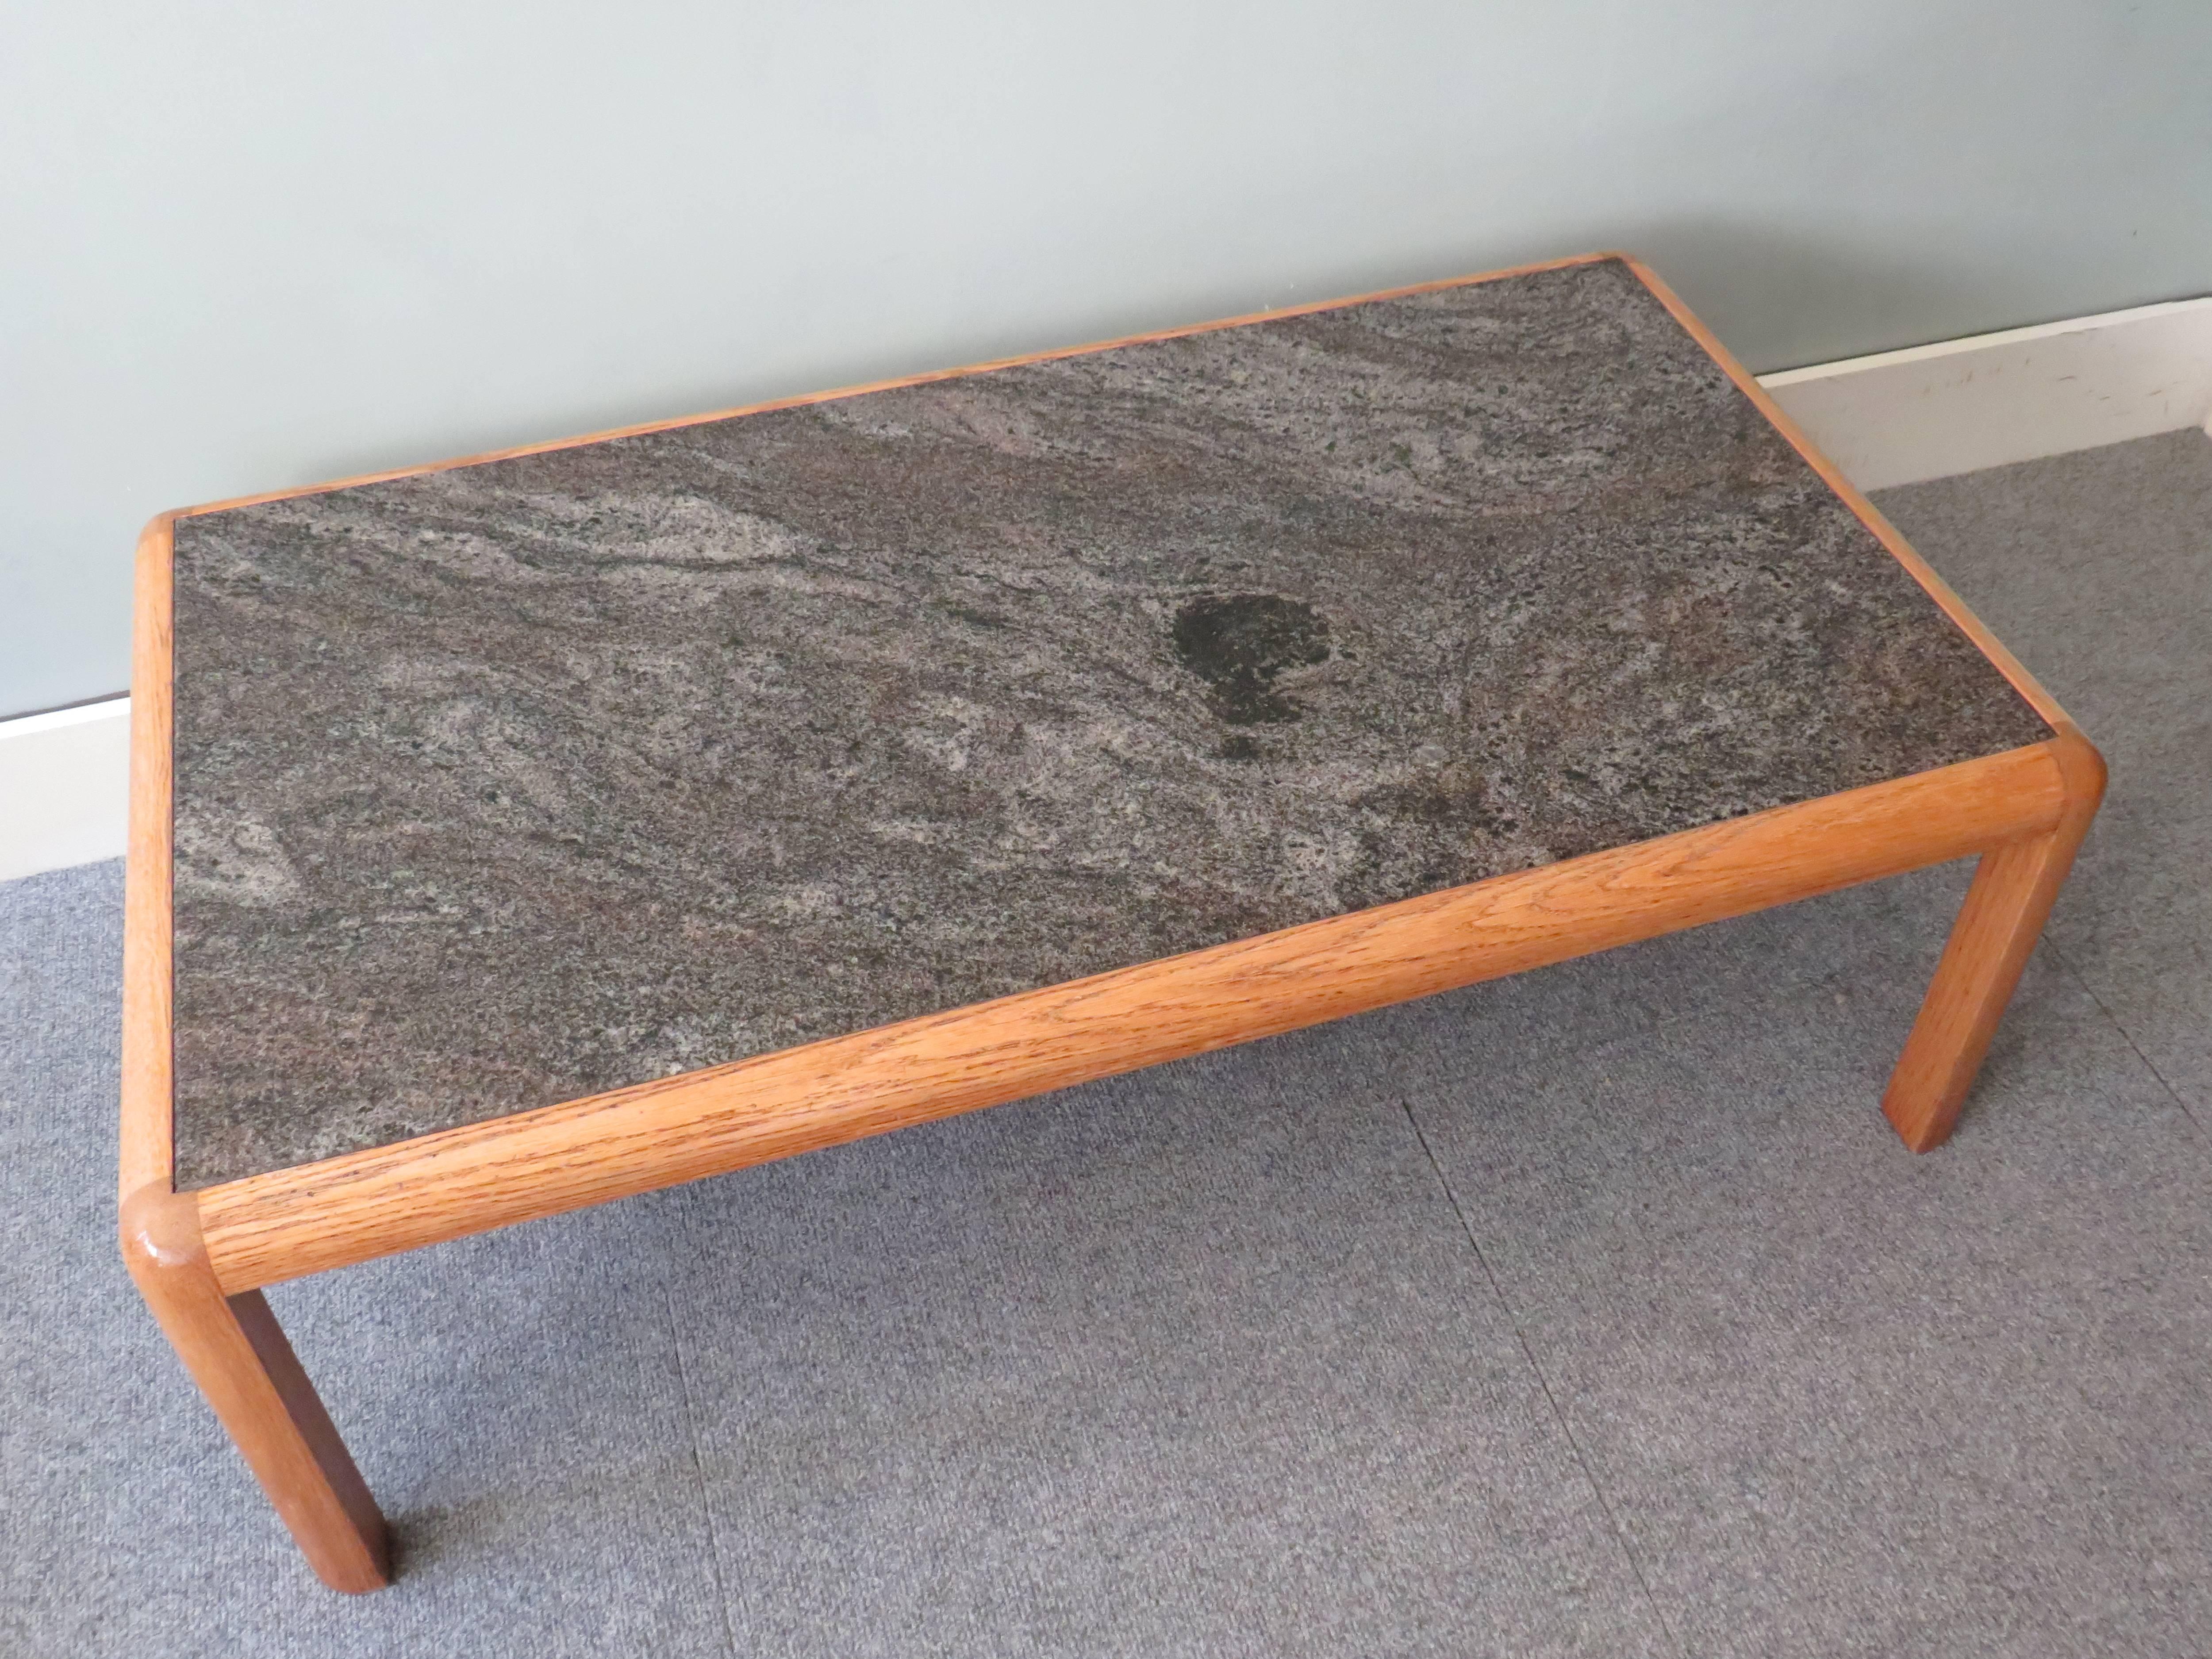 Coffee table by Van den Berghe-Pauvers, Ghent Belgium 1972.
Designed by Bob Van den Berghe and manufactured by Van den Berghe-Pauvers.
The table belongs to the Konstructo series, designed in 1972.
The table has a marble, blue and grey top and